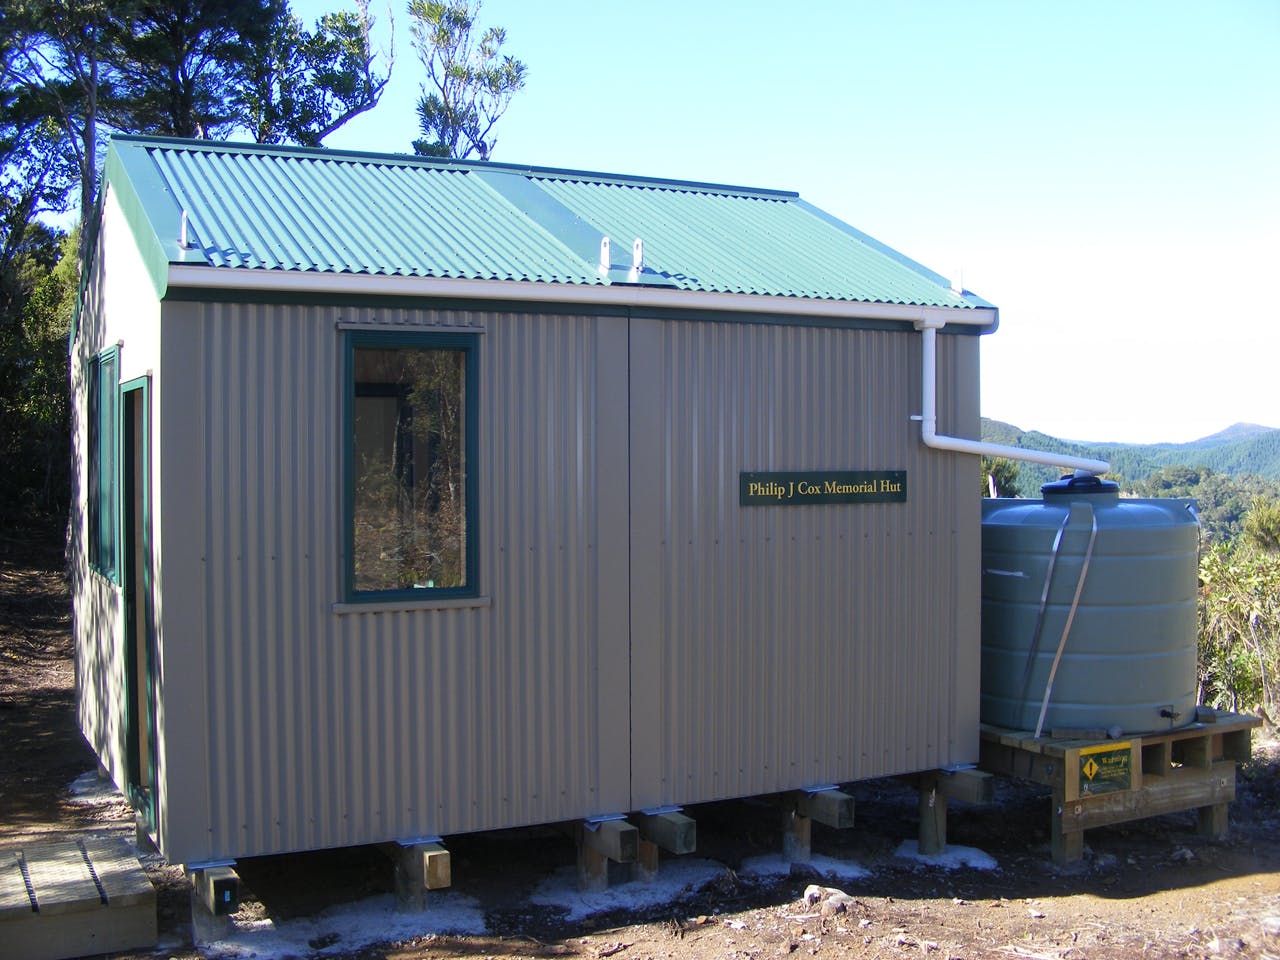 The new Silver Peaks hut is named after a local outdoorsman who died in 2009